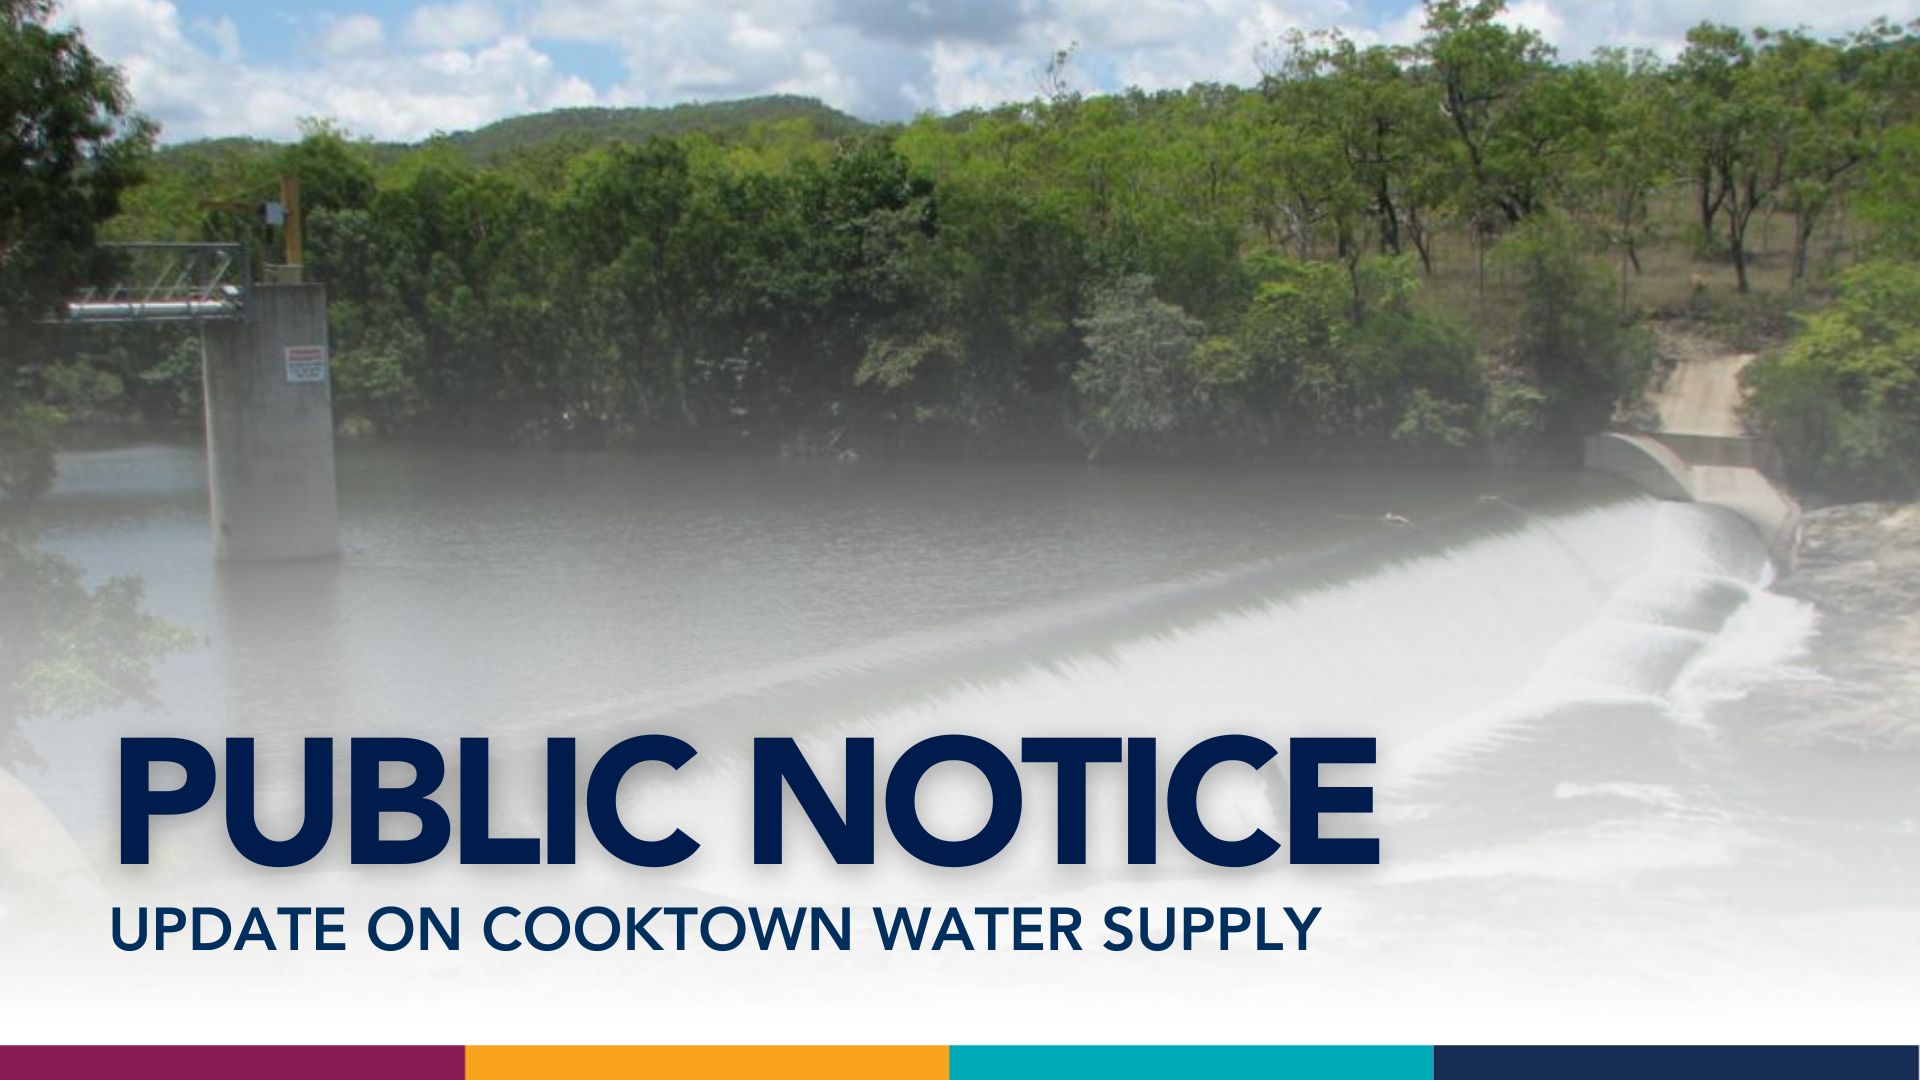 Web - Cooktown water supply post FNQ floods  